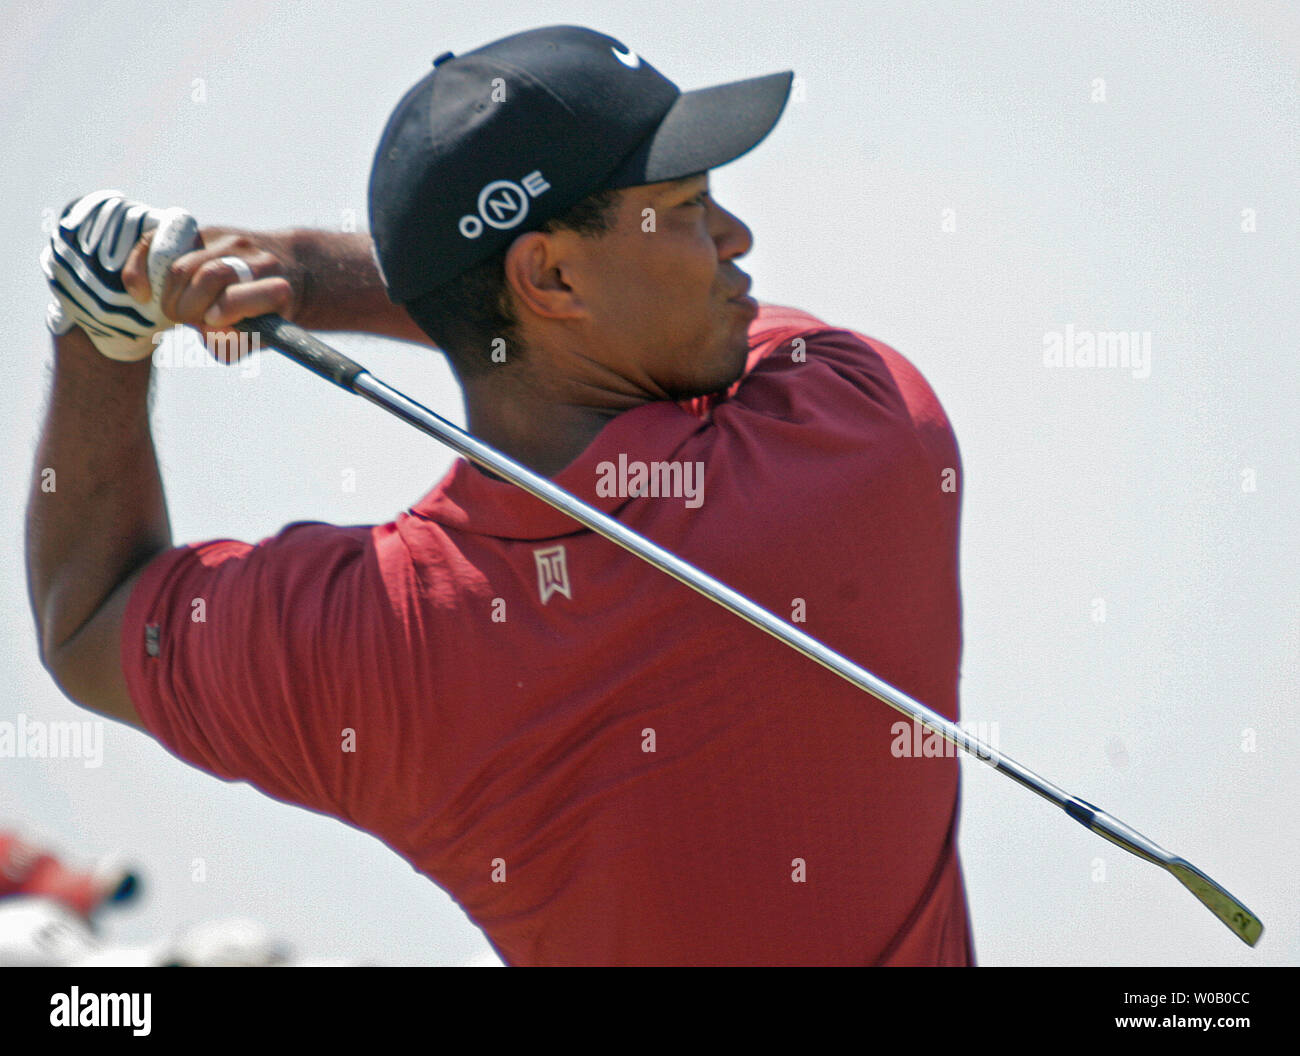 Leader Tiger Woods watches his two iron drive on the first hole during the final round of the 89th PGA Championship at Southern Hills Country Club in Tulsa, Oklahoma on August 12, 2007.  Woods starts the final round with a three shot lead at seven under par.  (UPI Photo/Gary C. Caskey) Stock Photo